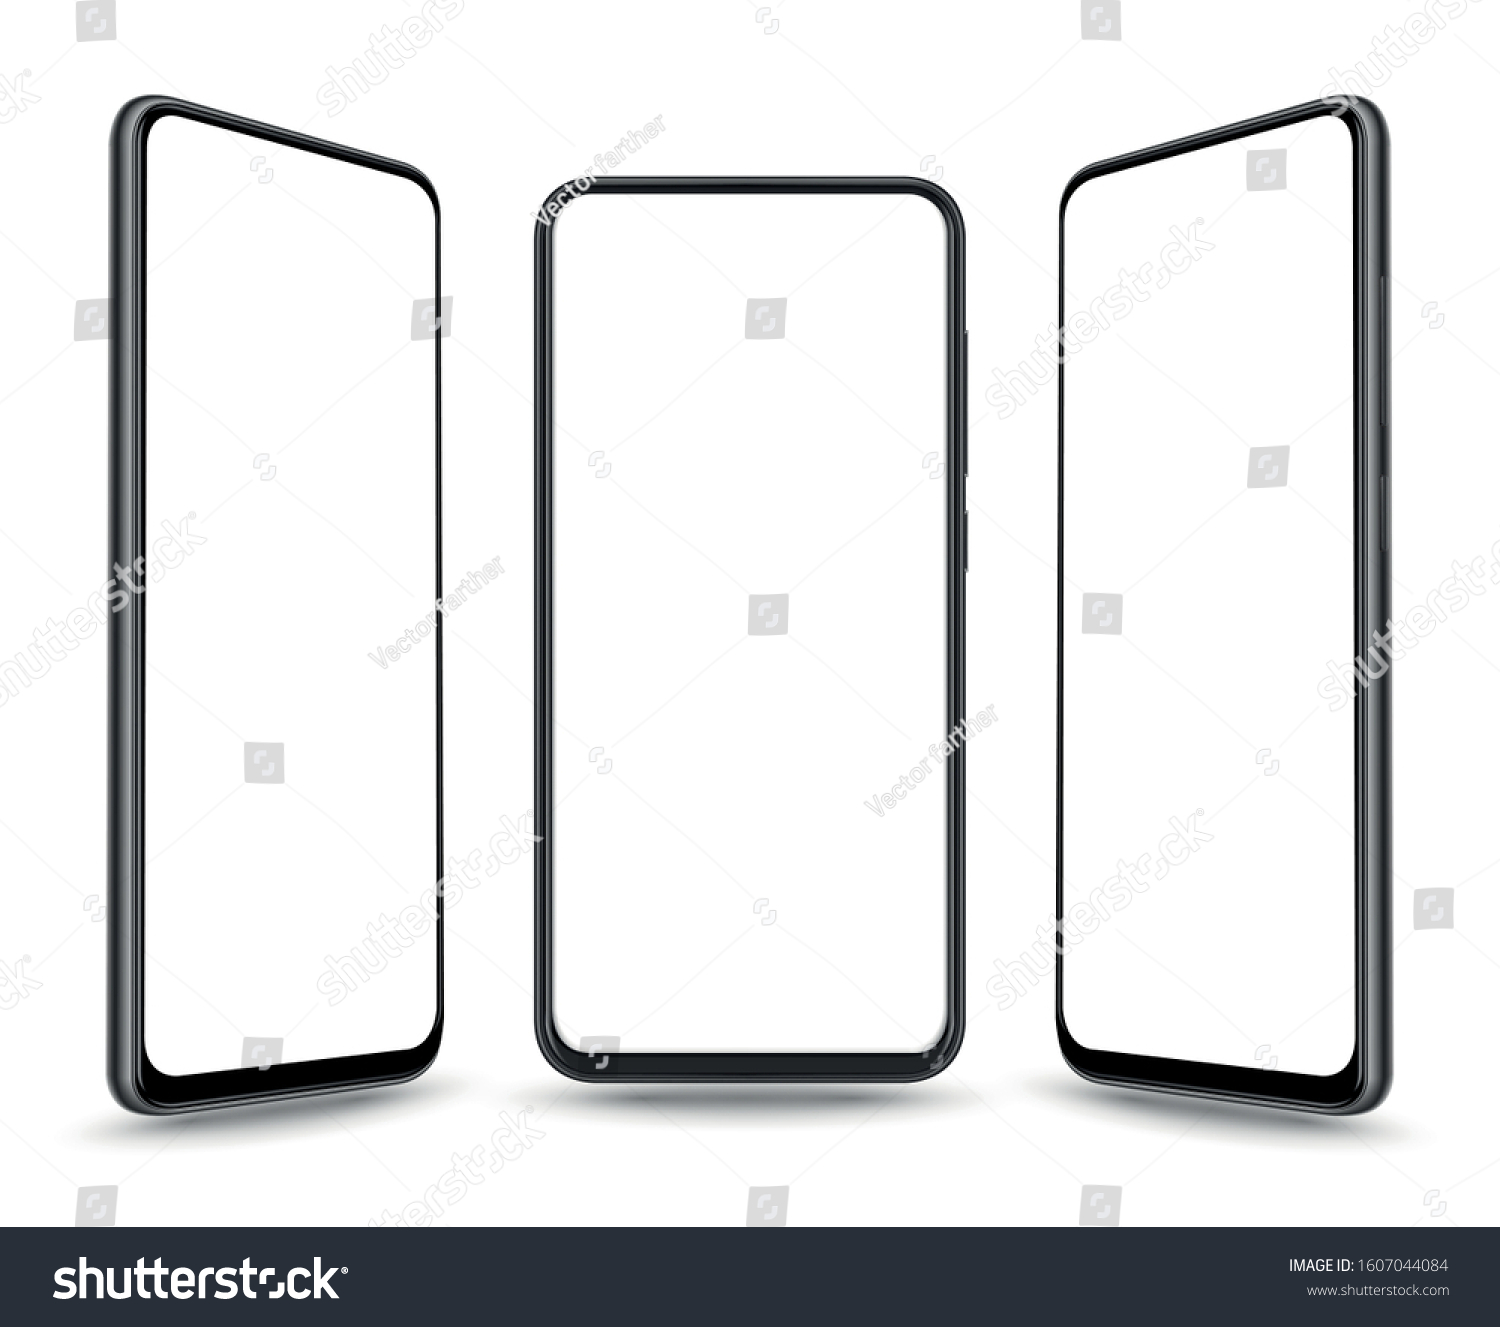 New realistic mobile phone smartphone collection perspective mockups with blank screen isolated on white background.  #1607044084